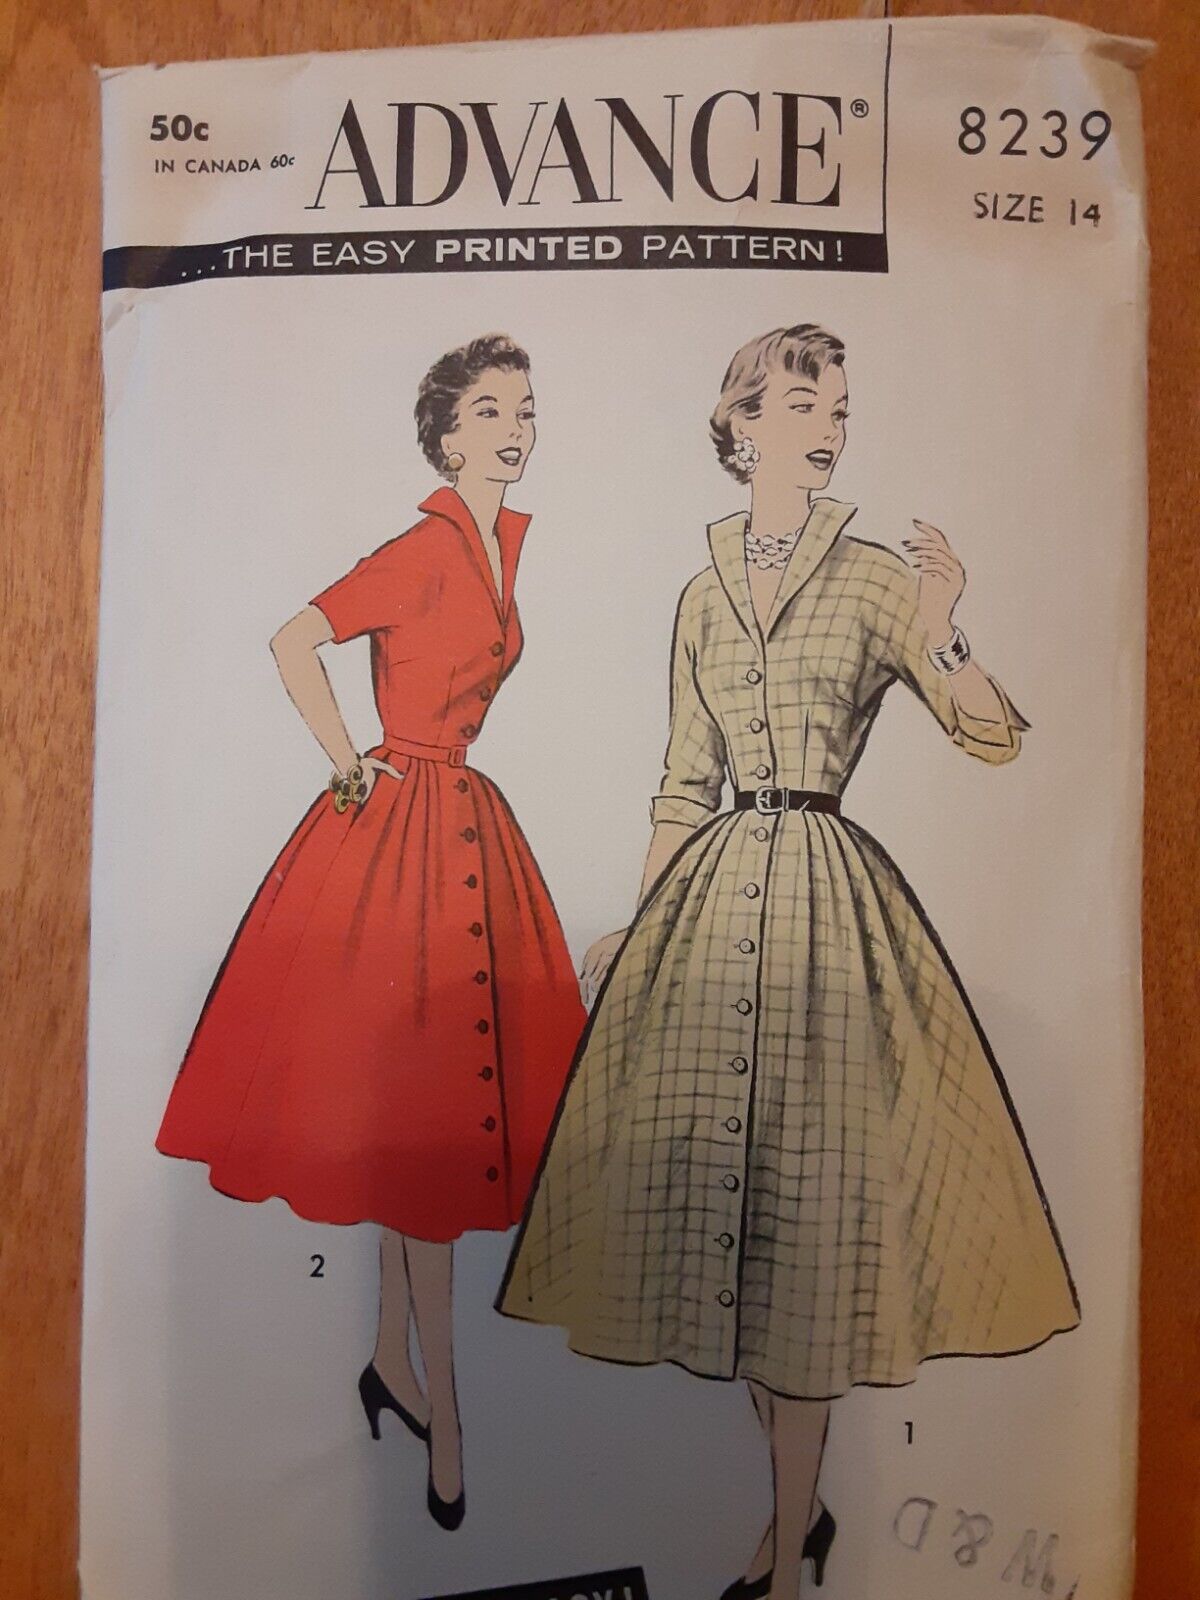 1957 Advance #8239 Miss Size 14 Bust 34 Shirtdress-only 4 Major Pattern Pieces